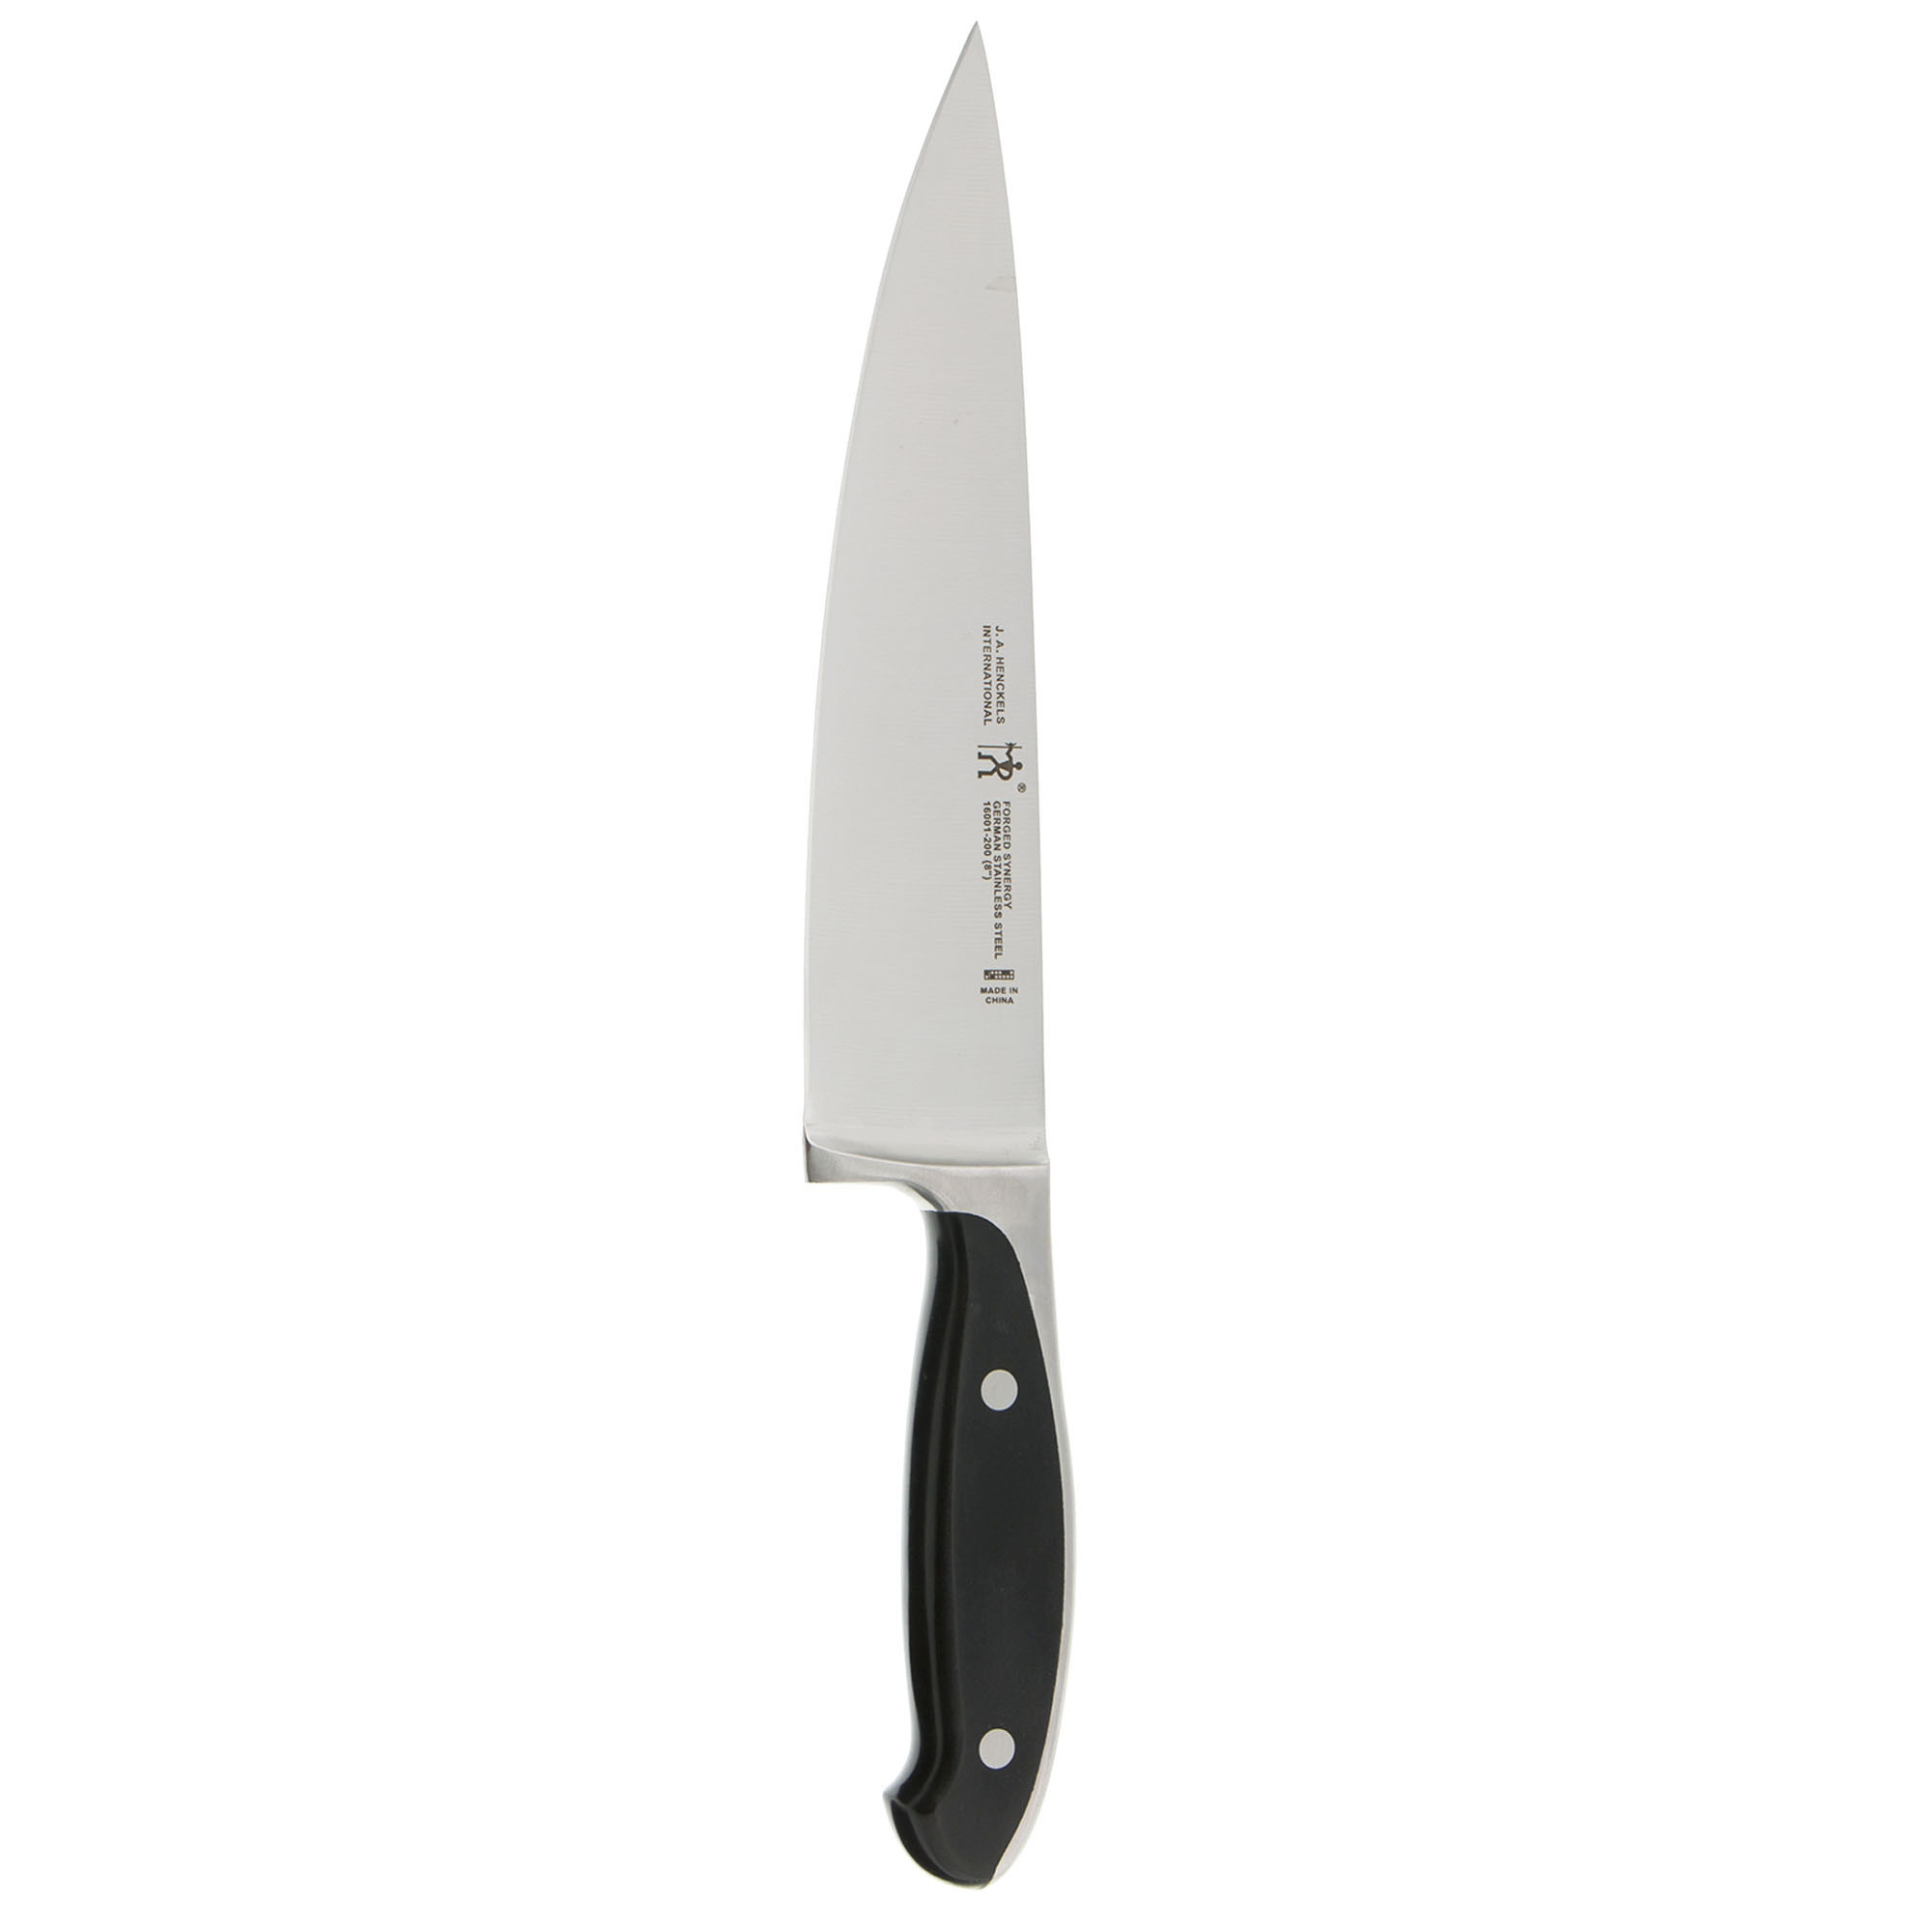 Henckels Forged Synergy 8-inch Chef's Knife